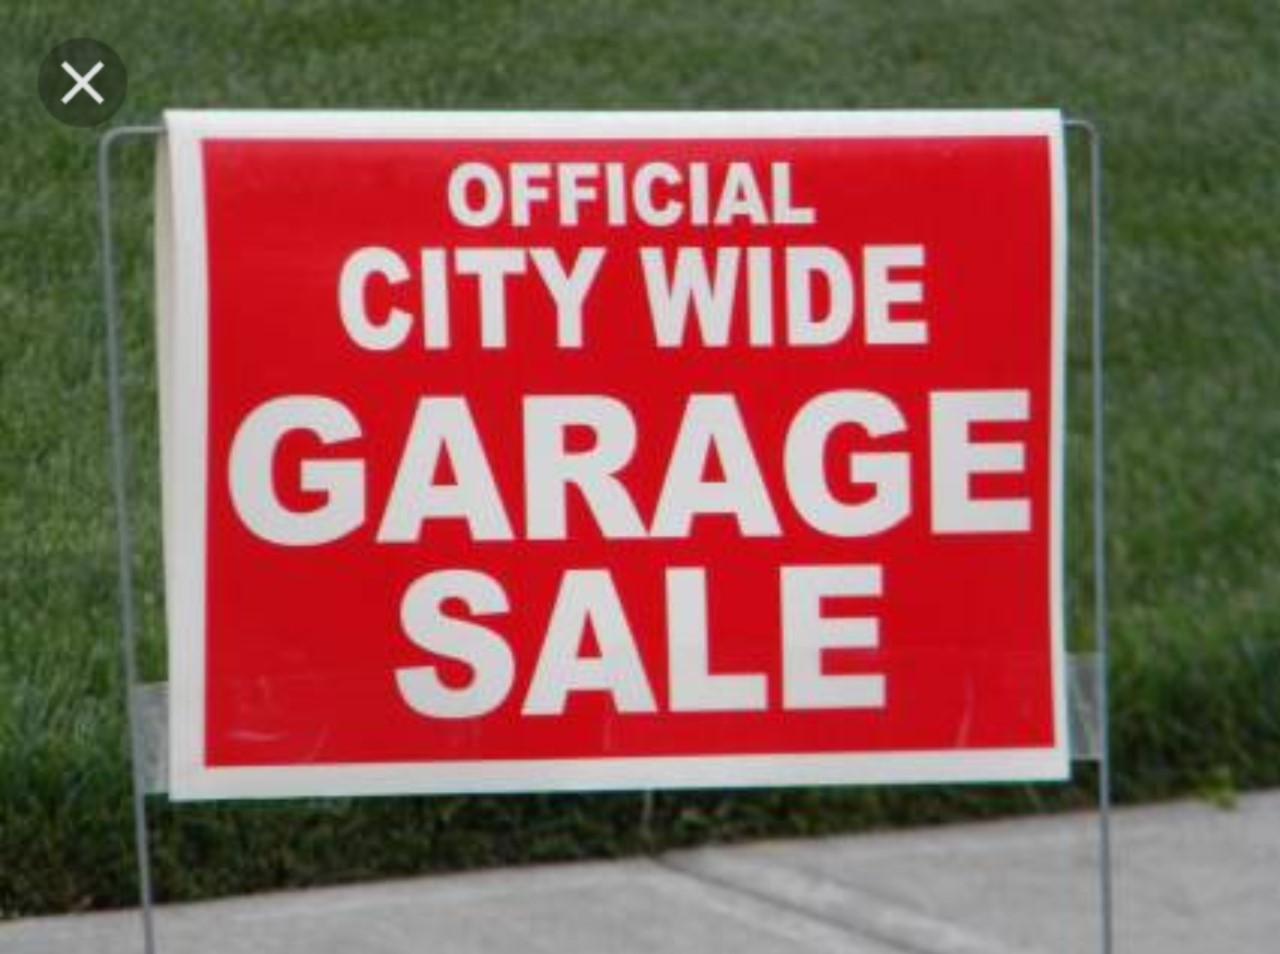 Mid America Live Rich Hill City Wide Garage Sale is set for October 8th